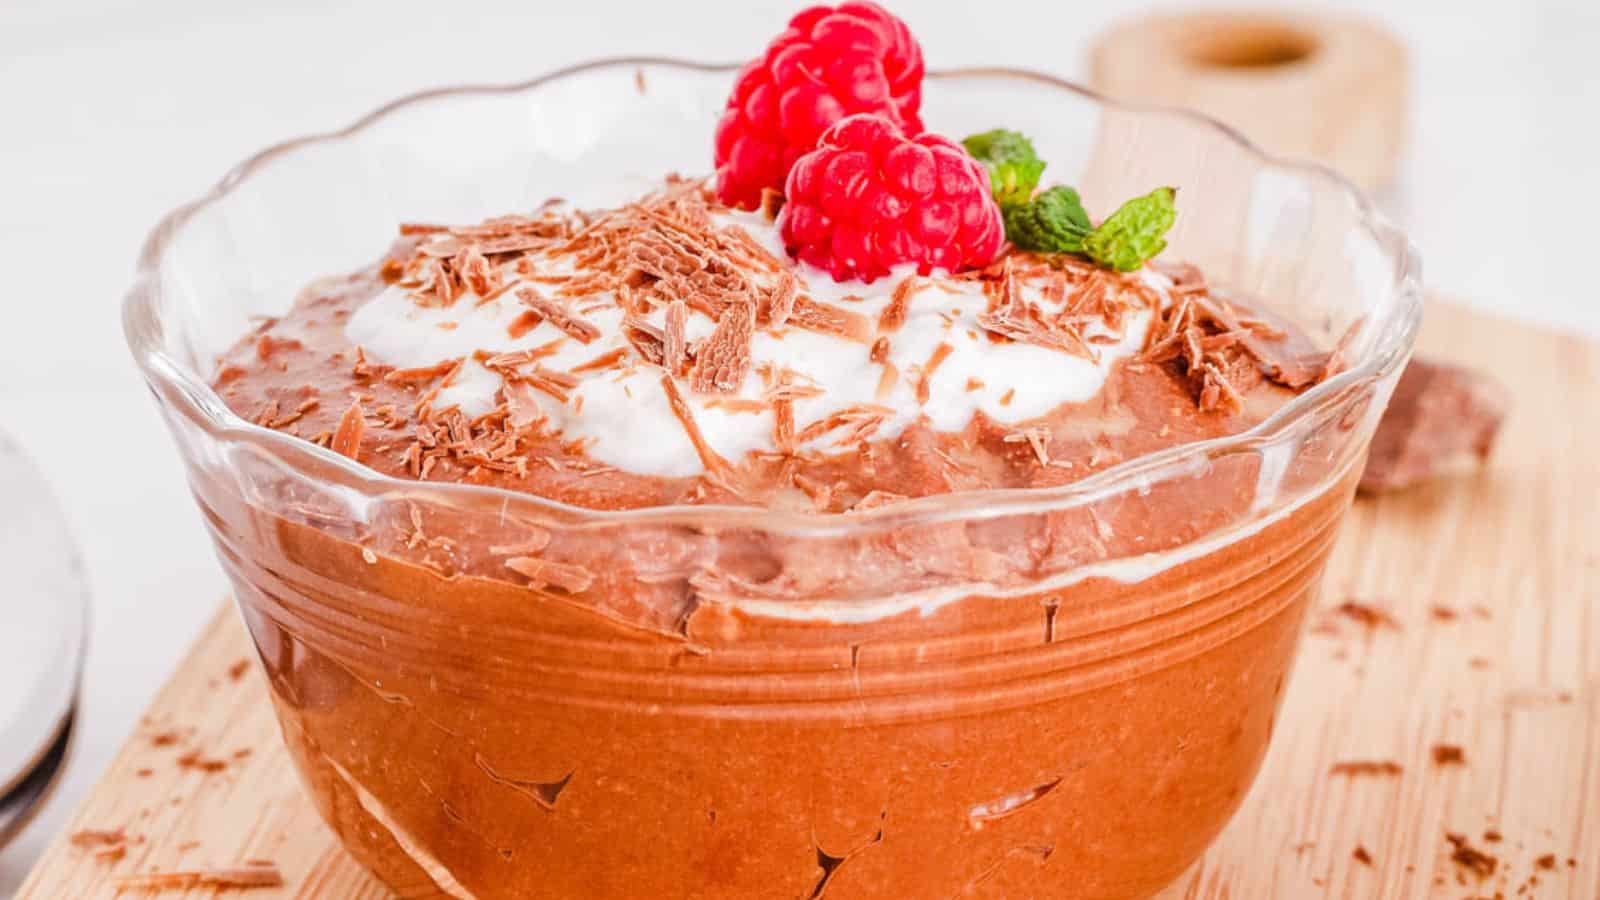 A bowl of chocolate mousse with raspberries and mint.